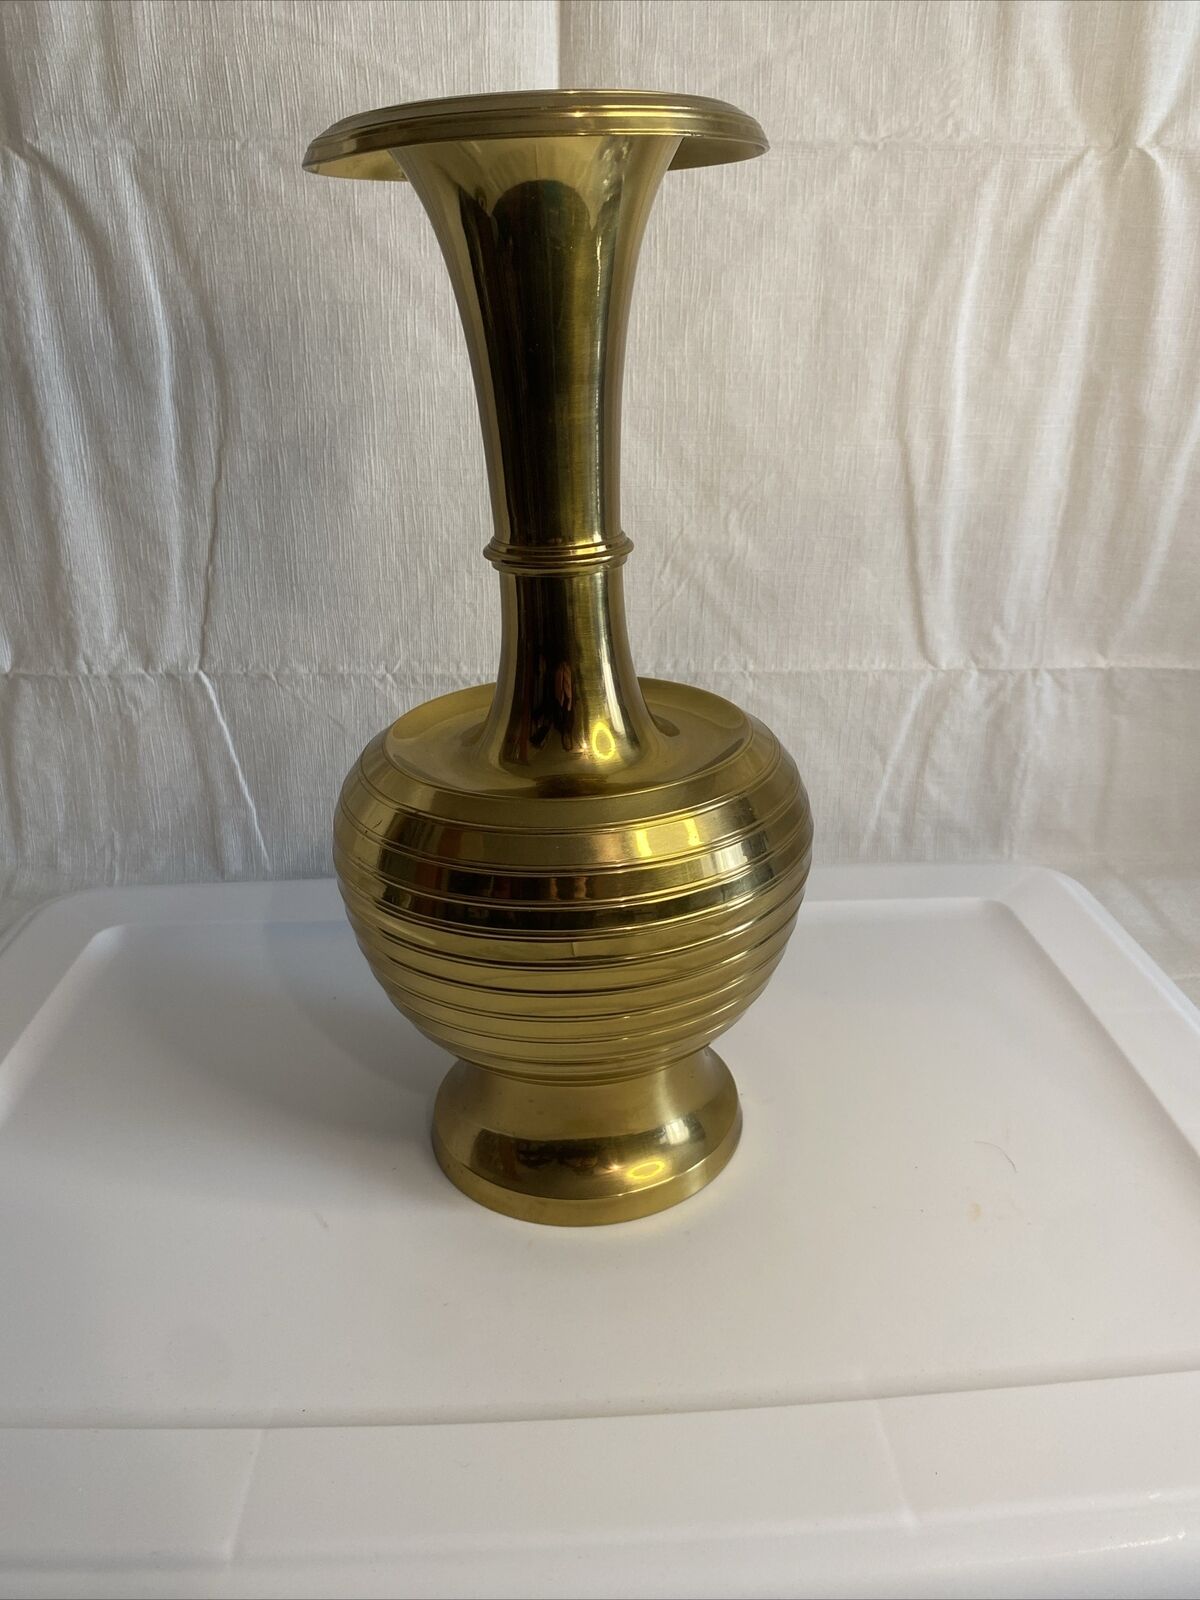 Vintage Heavy Trumpet Solid Brass Vase 14 1/4” Made In India